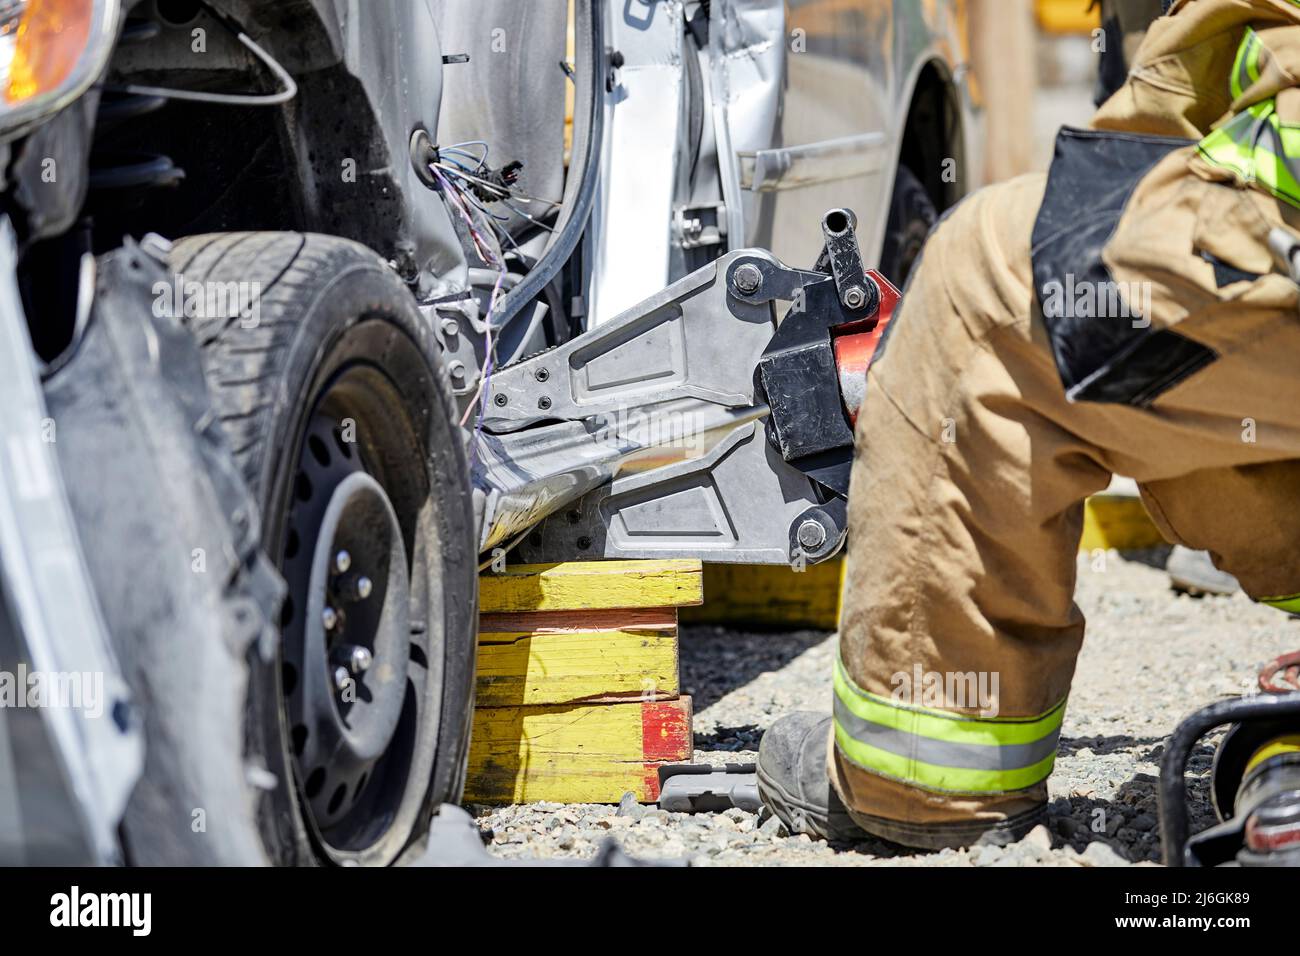 Fire Fighters using the Jaws of Life to dismantle a car during a demonstration Stock Photo